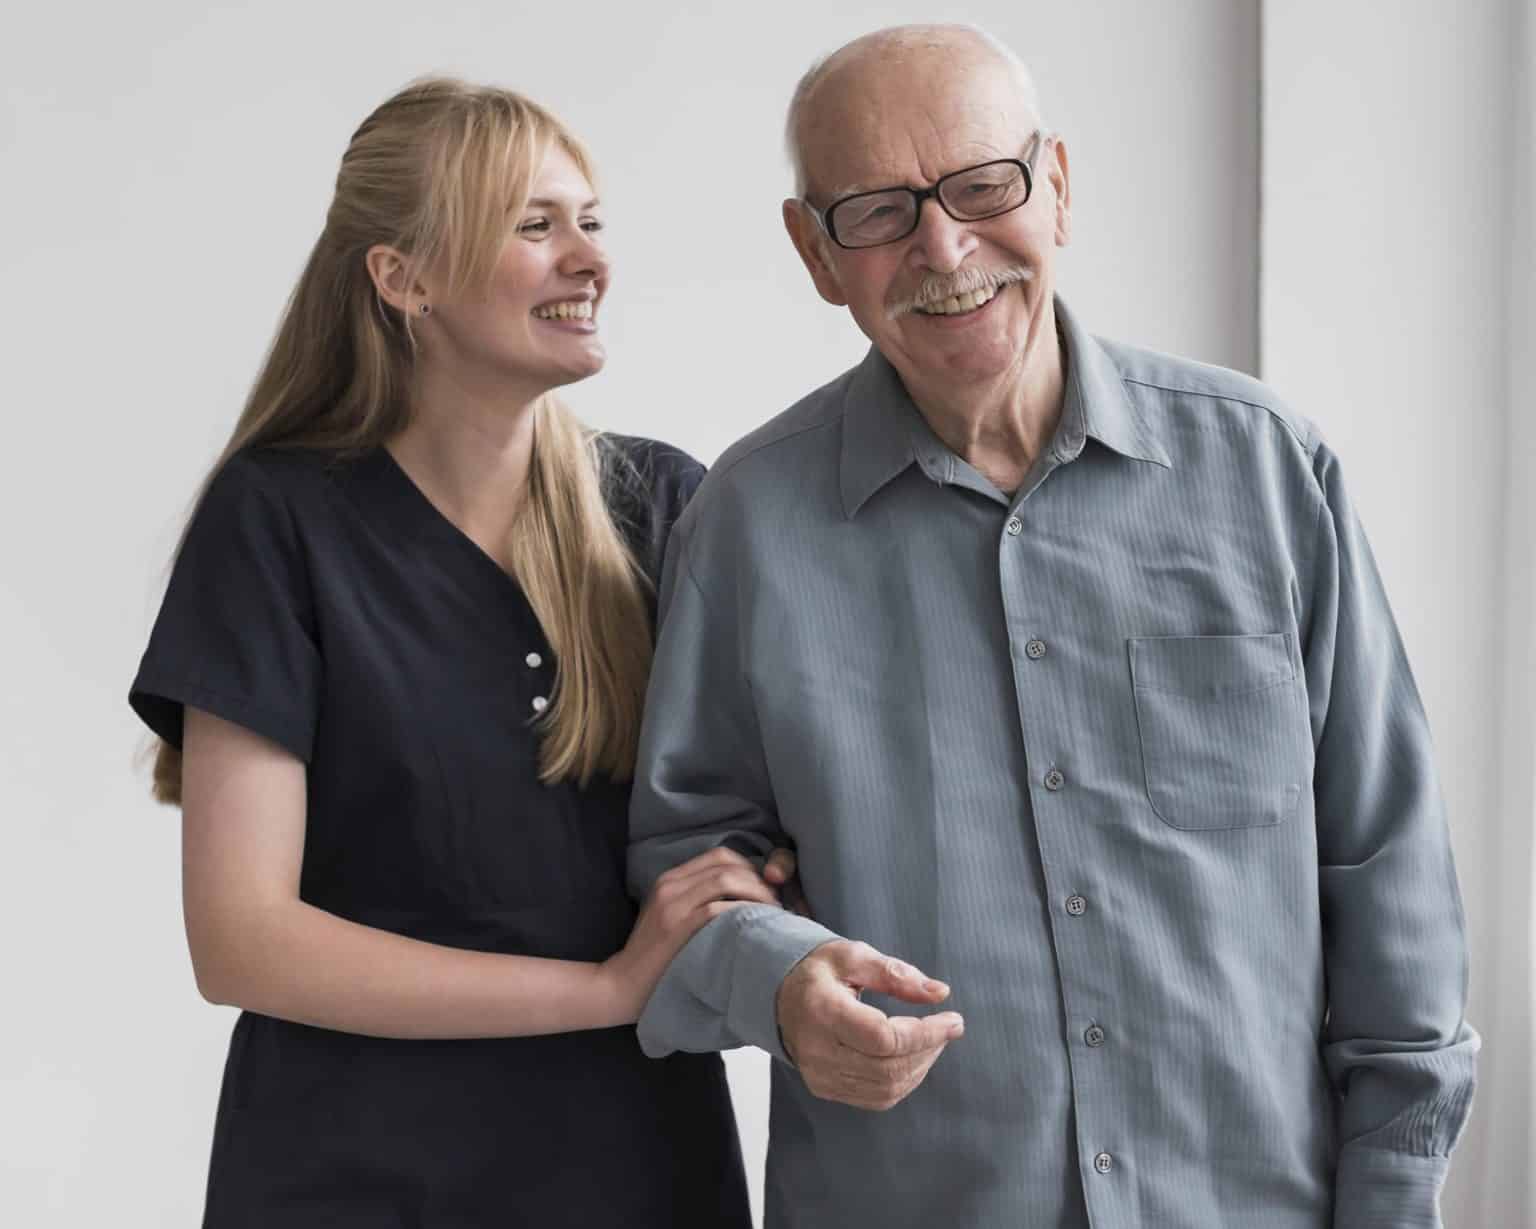 smiley-old-man-and-nurse